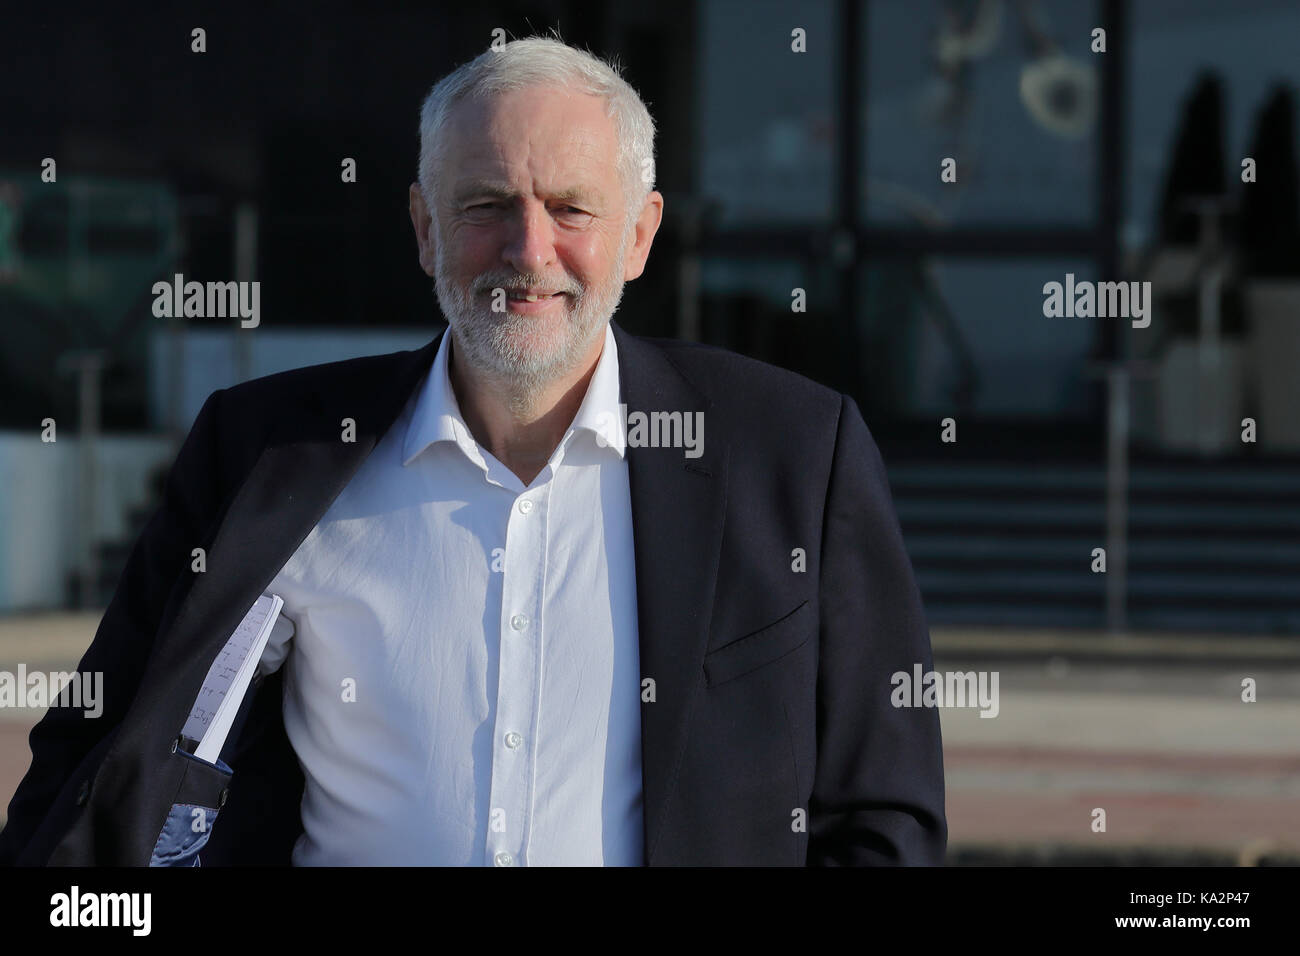 Brighton, UK. 24th September, 2017. Jeremy Corbyn, leader of Britain's opposition Labour party arrives, displaying a set of notes in his jacket pocket before an interview for the 'Andrew Marr Show' during the annual Labour Party Conference in Brighton, UK Sunday, September 24, 2017. Photograph : Credit: Luke MacGregor/Alamy Live News Stock Photo